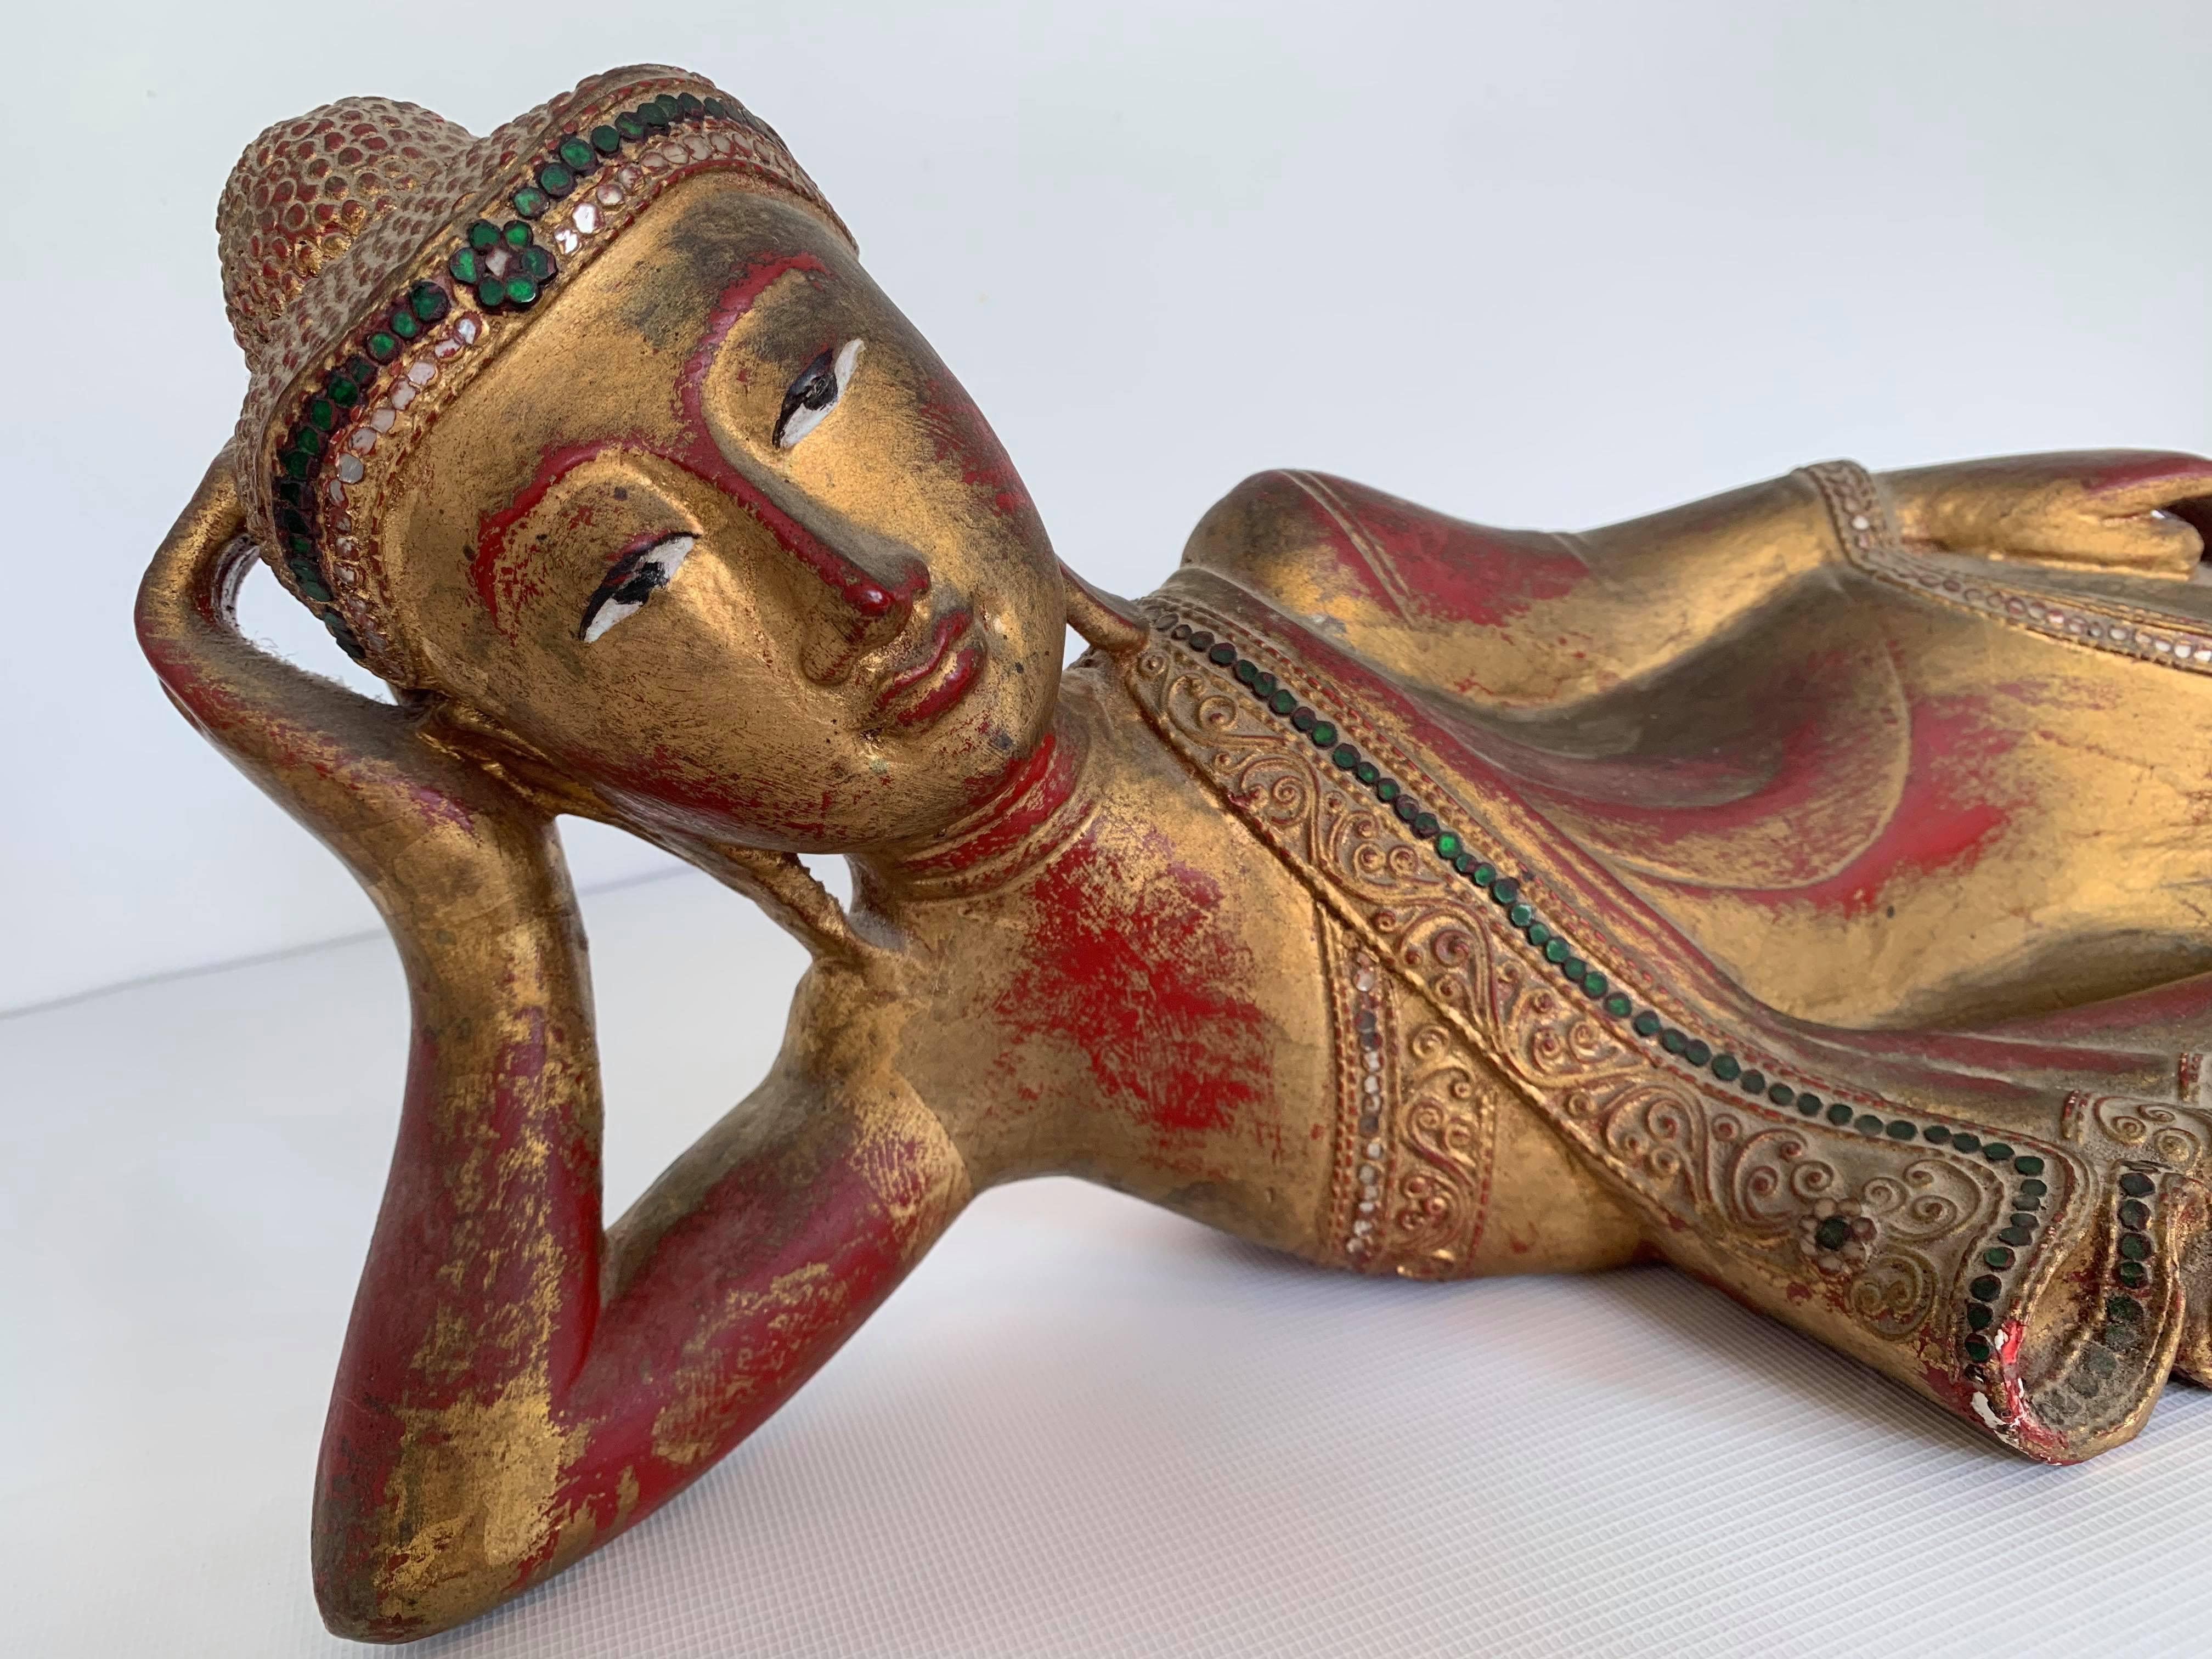 Southeast Asian Reclining Buddha - Other Art Style Sculpture by Unknown